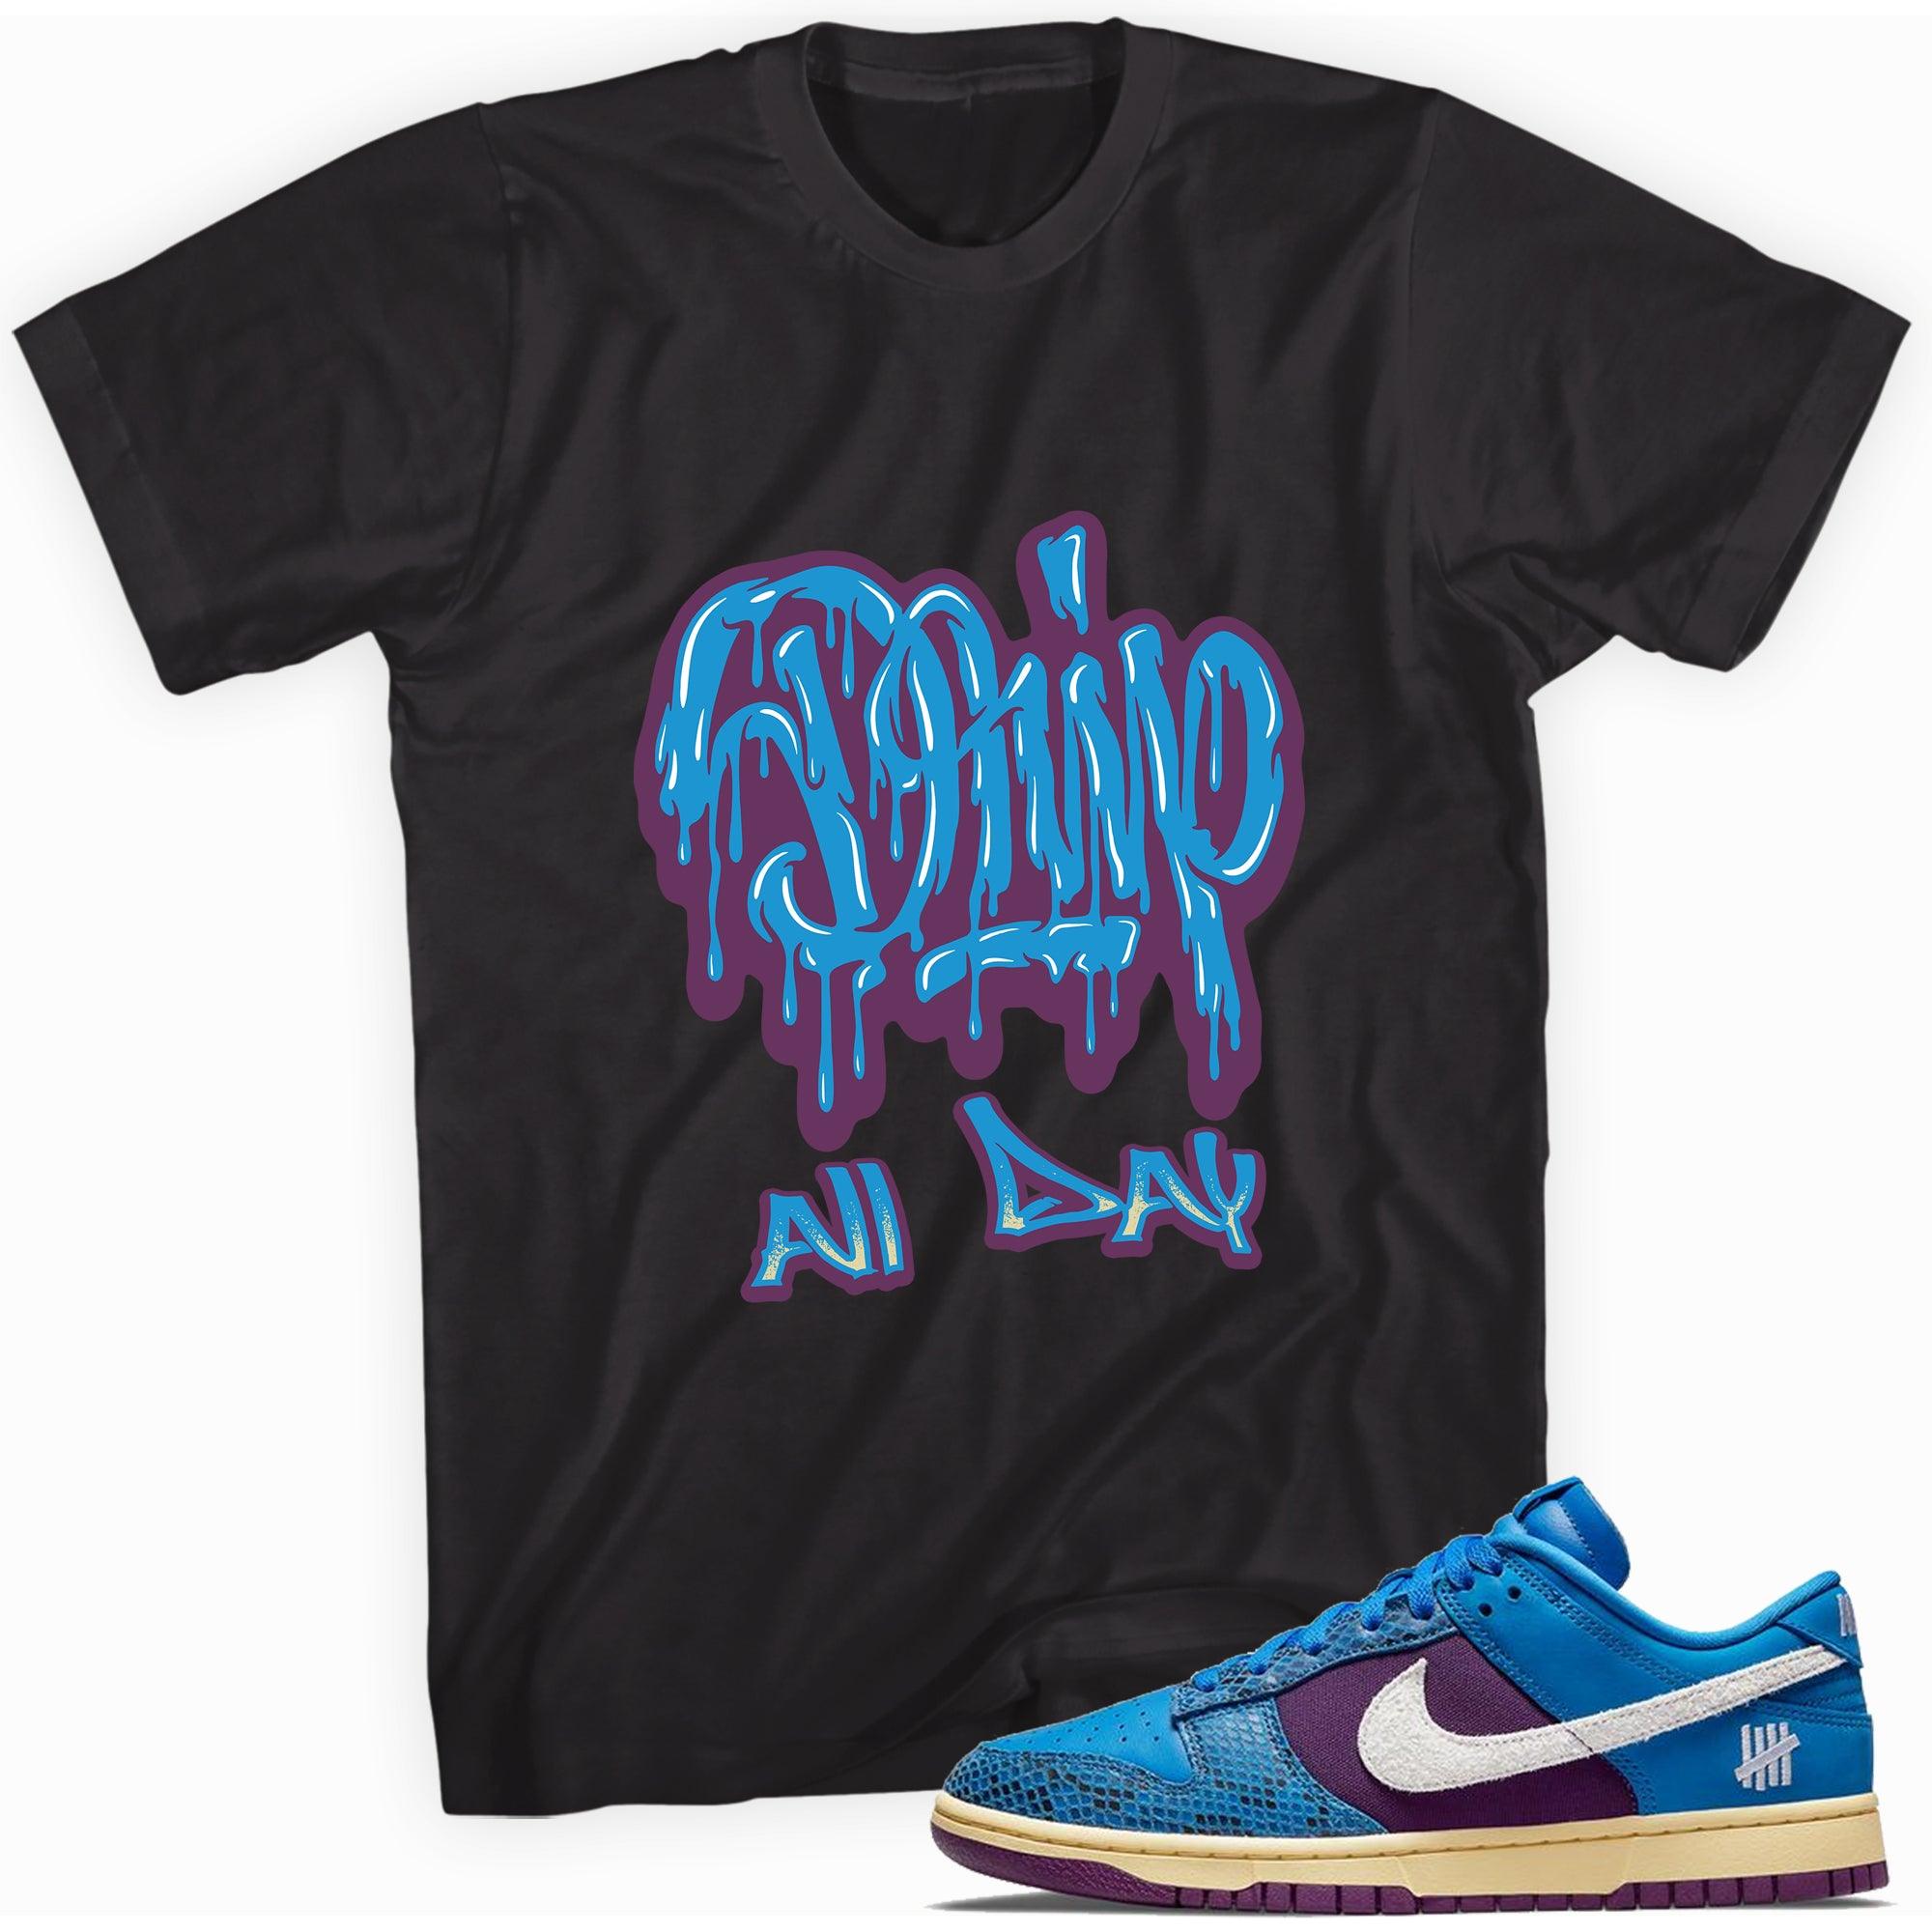 Black Drip All Day Shirt Nike Dunk Low Undefeated 5 On It Dunk vs AF1 photo